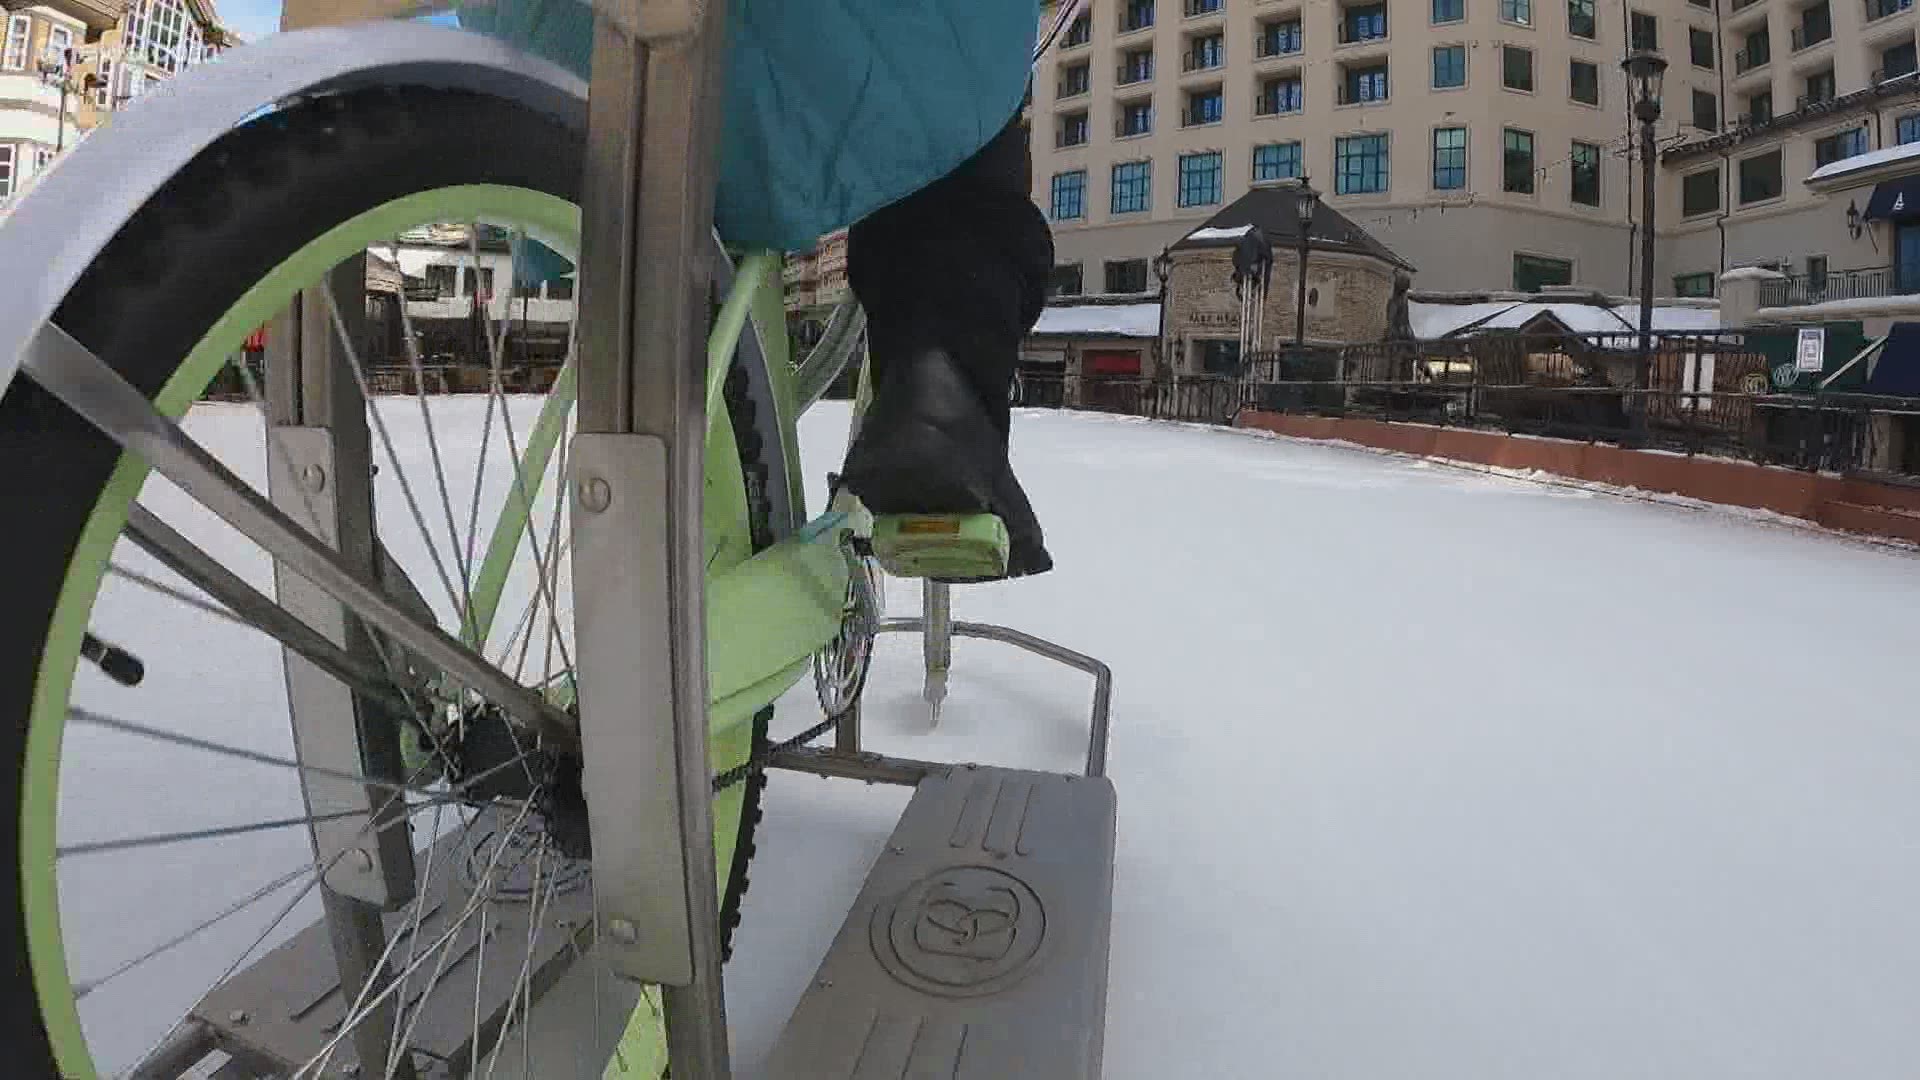 At the Beaver Creek Ice Rink, you now can rent bikes that glide on ice.